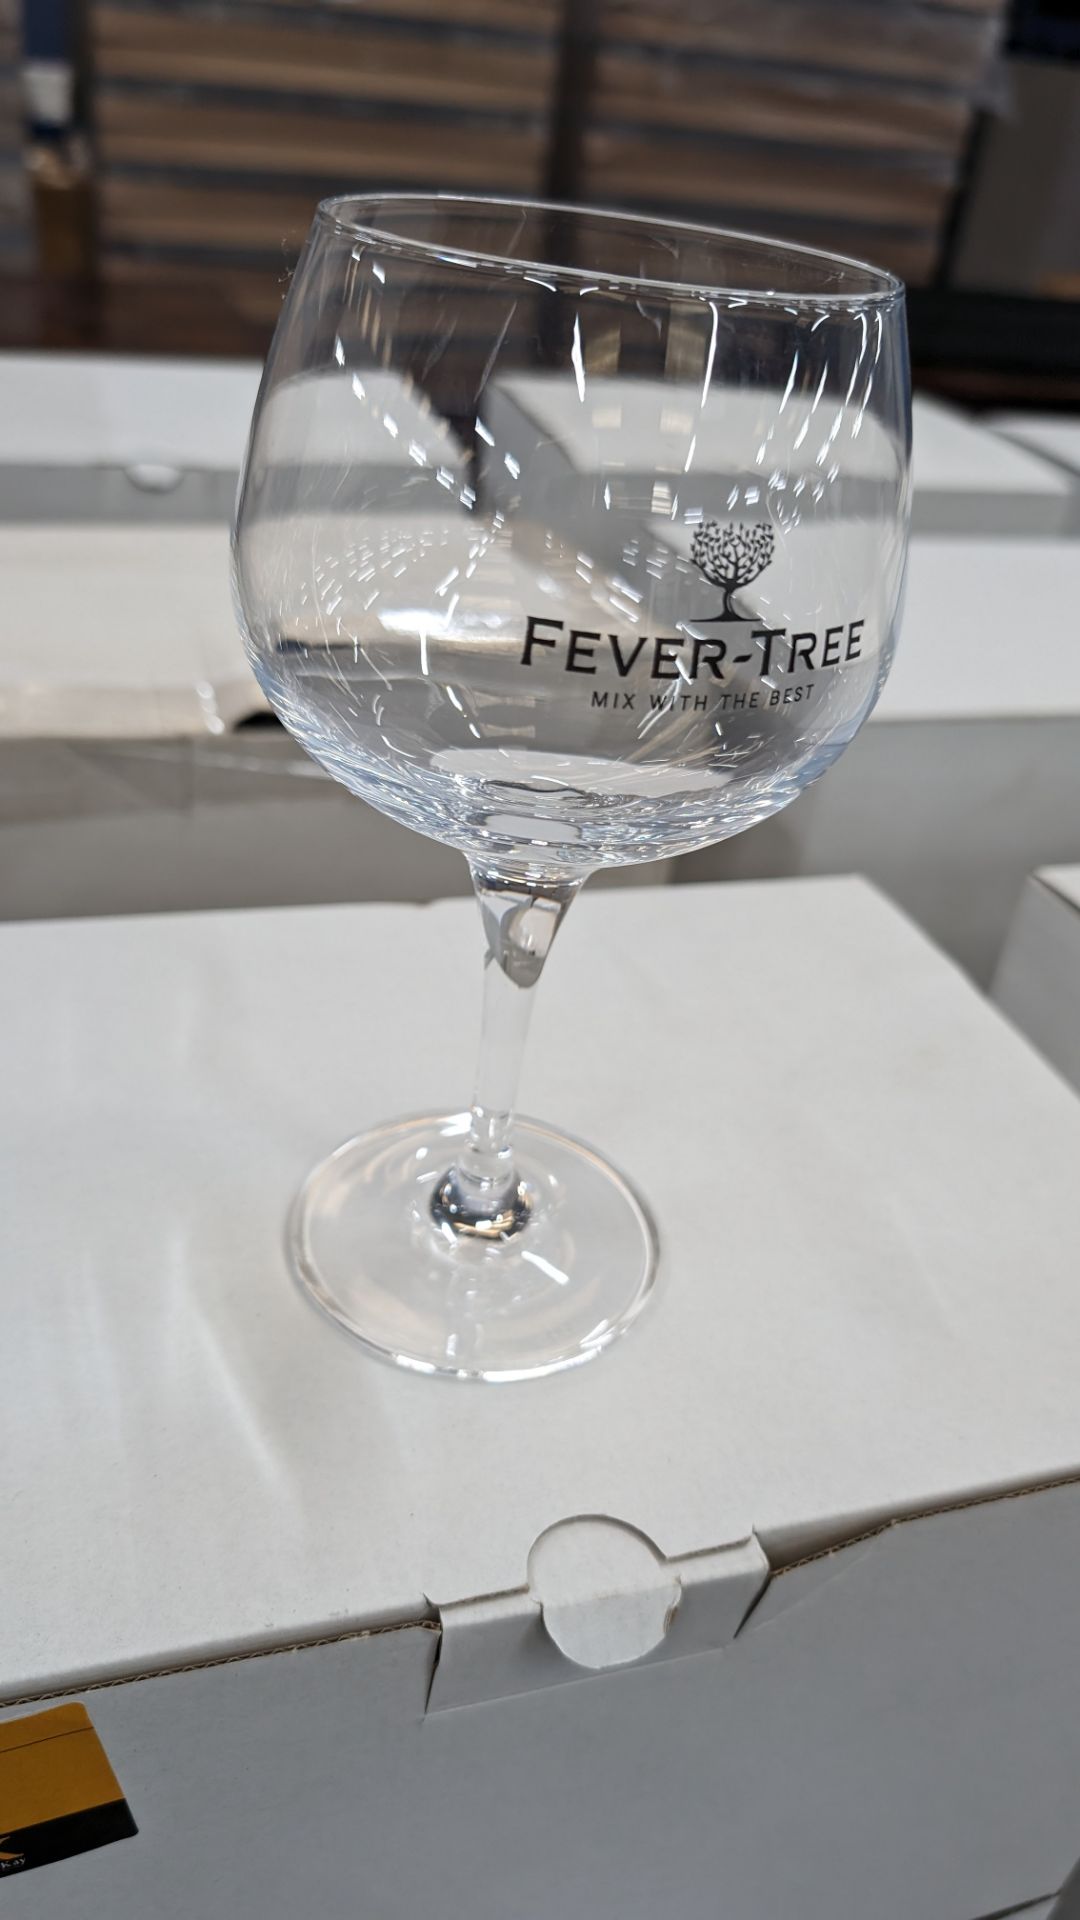 36 off Fever-Tree branded gin & tonic glasses comprising 6 boxes each with 6 glasses - Image 4 of 4